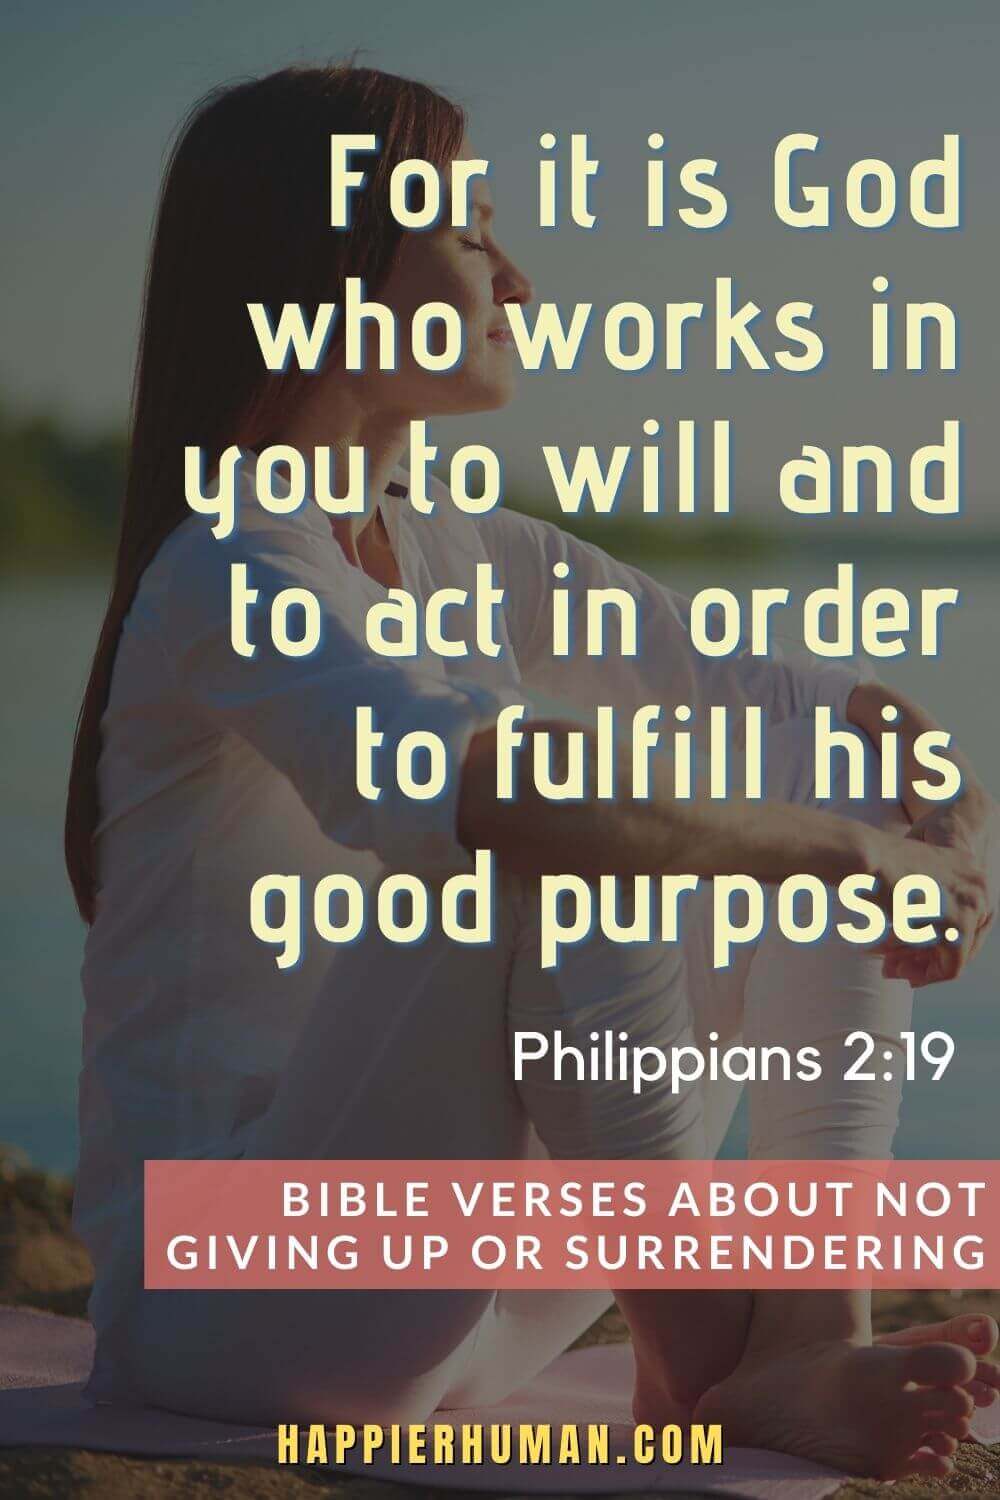 Bible Verses About Not Giving up - Philippians 2:19 says, “For it is God who works in you to will and to act in order to fulfill his good purpose.” | bible verses about not giving up on your spouse | bible verses about not giving up images | best bible verses about not giving up